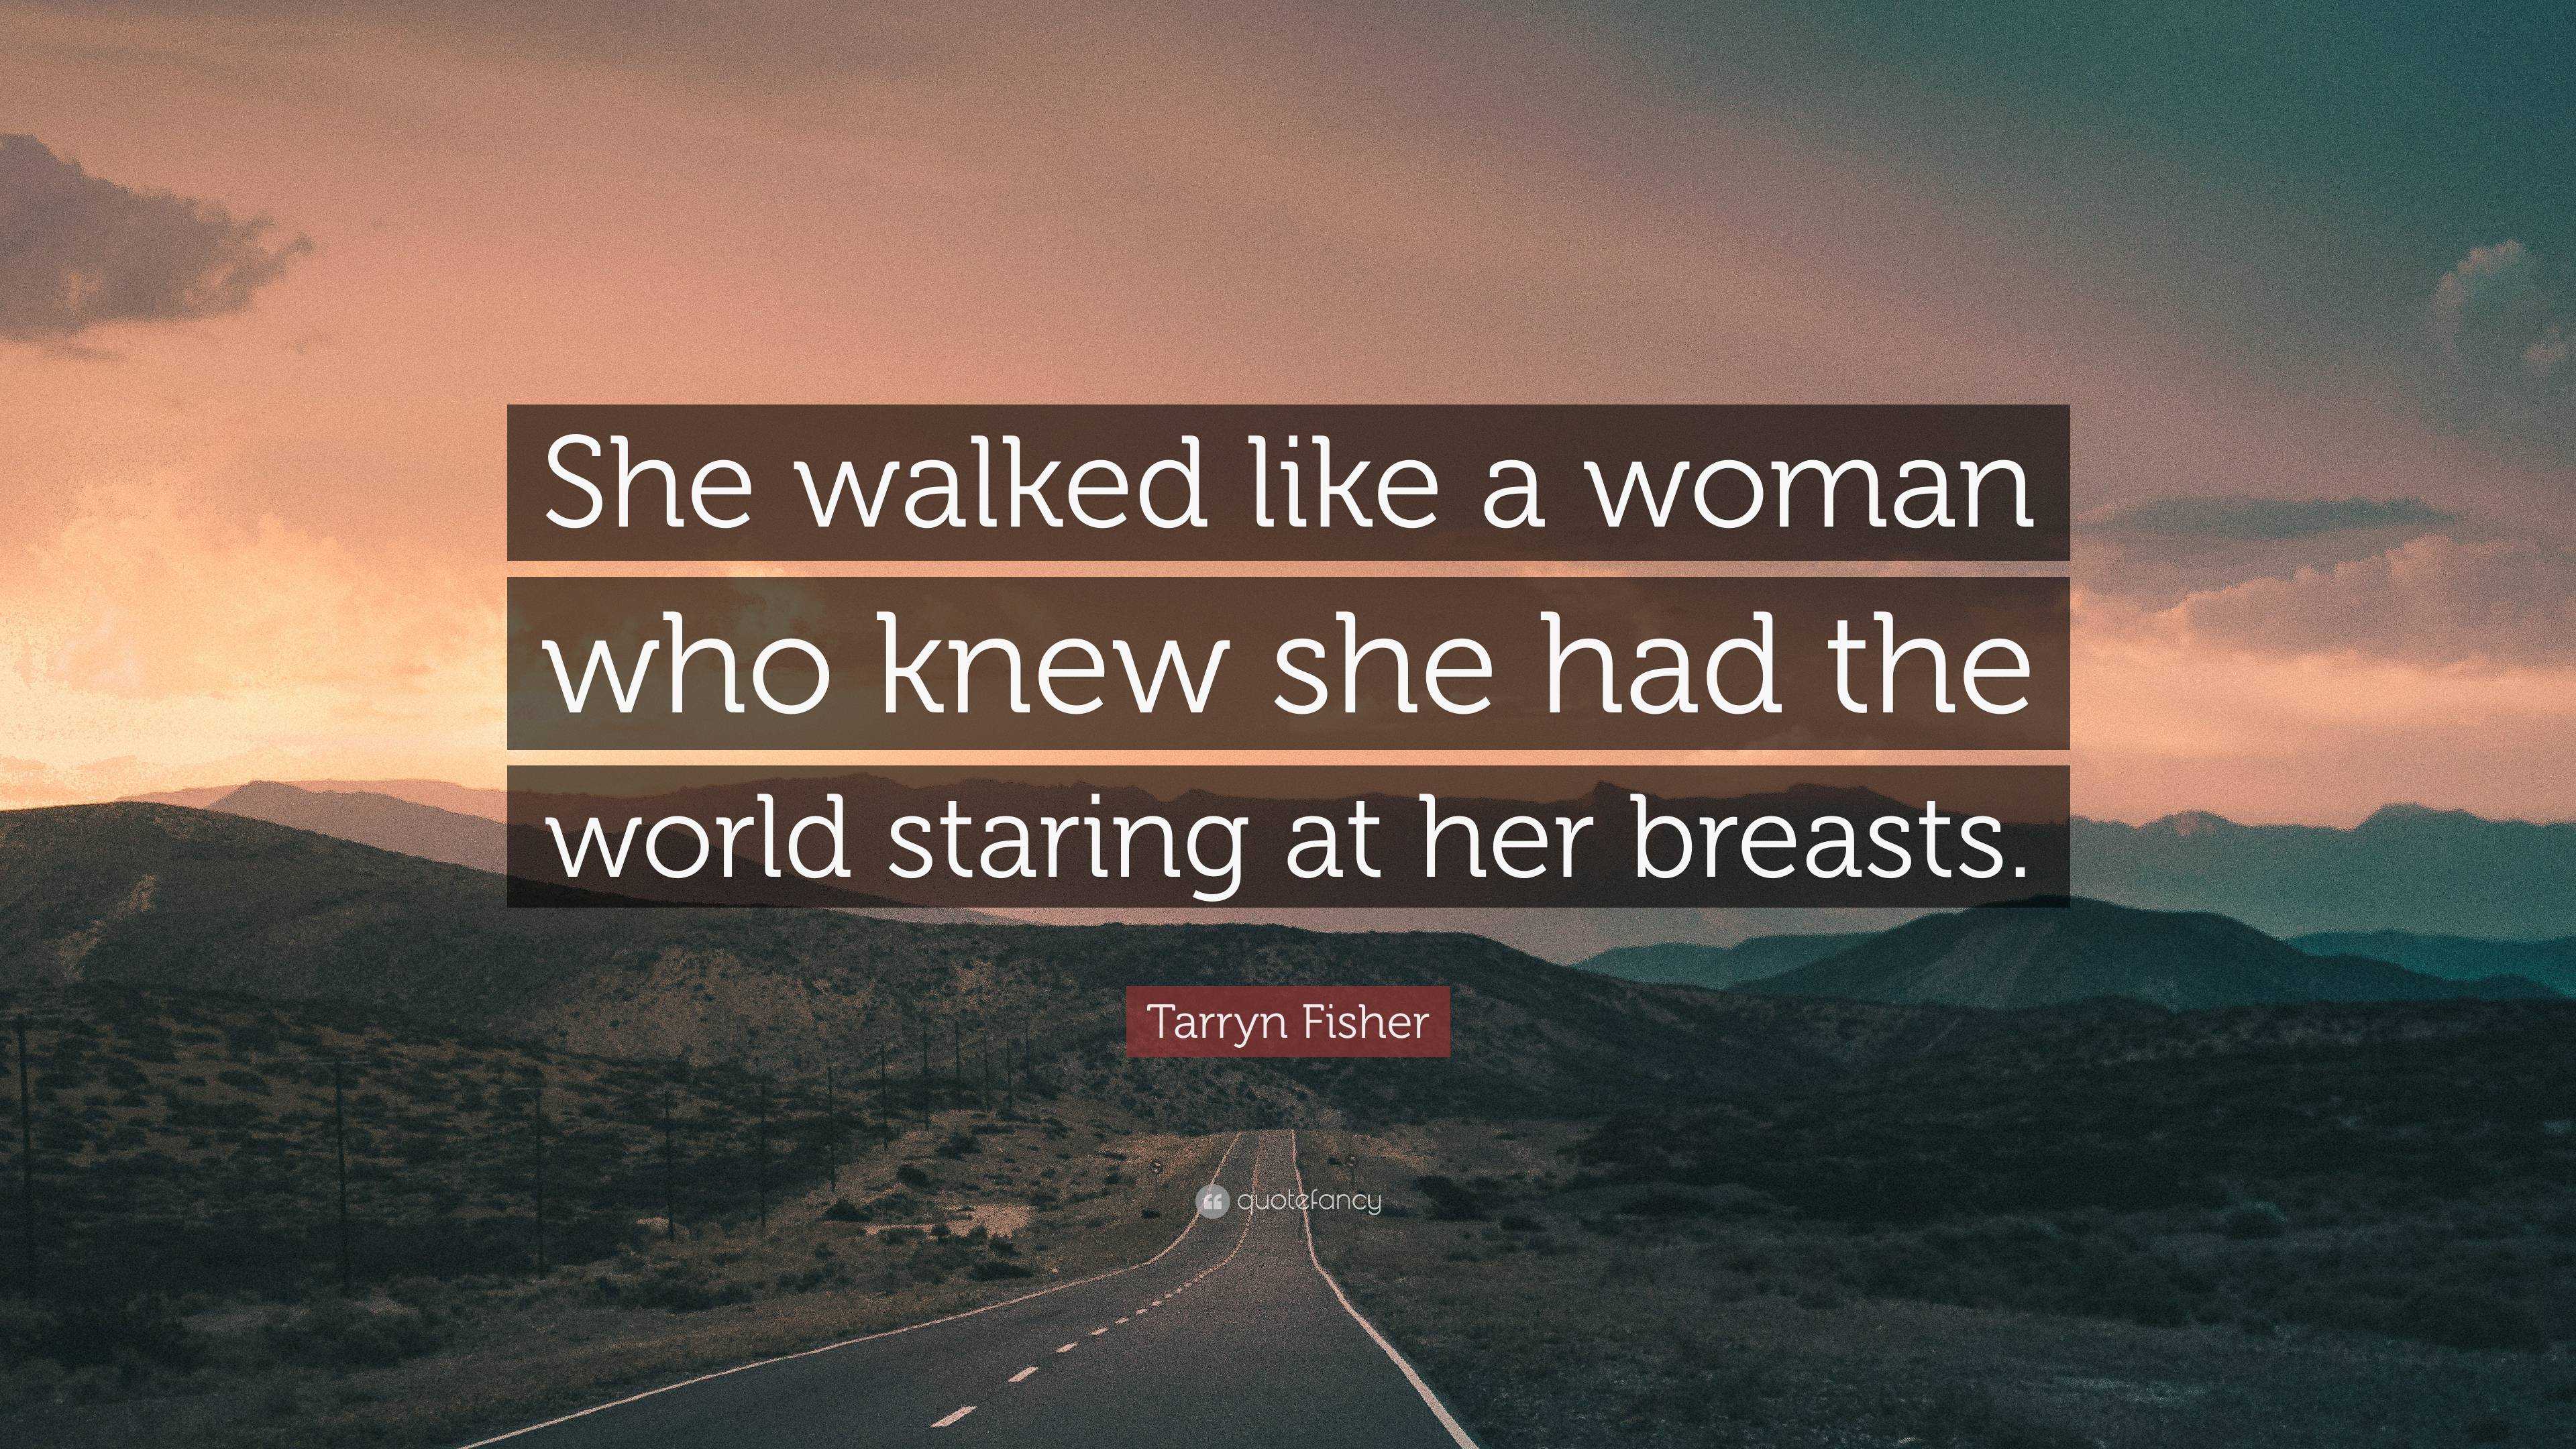 Tarryn Fisher Quote: “She walked like a woman who knew she had the ...